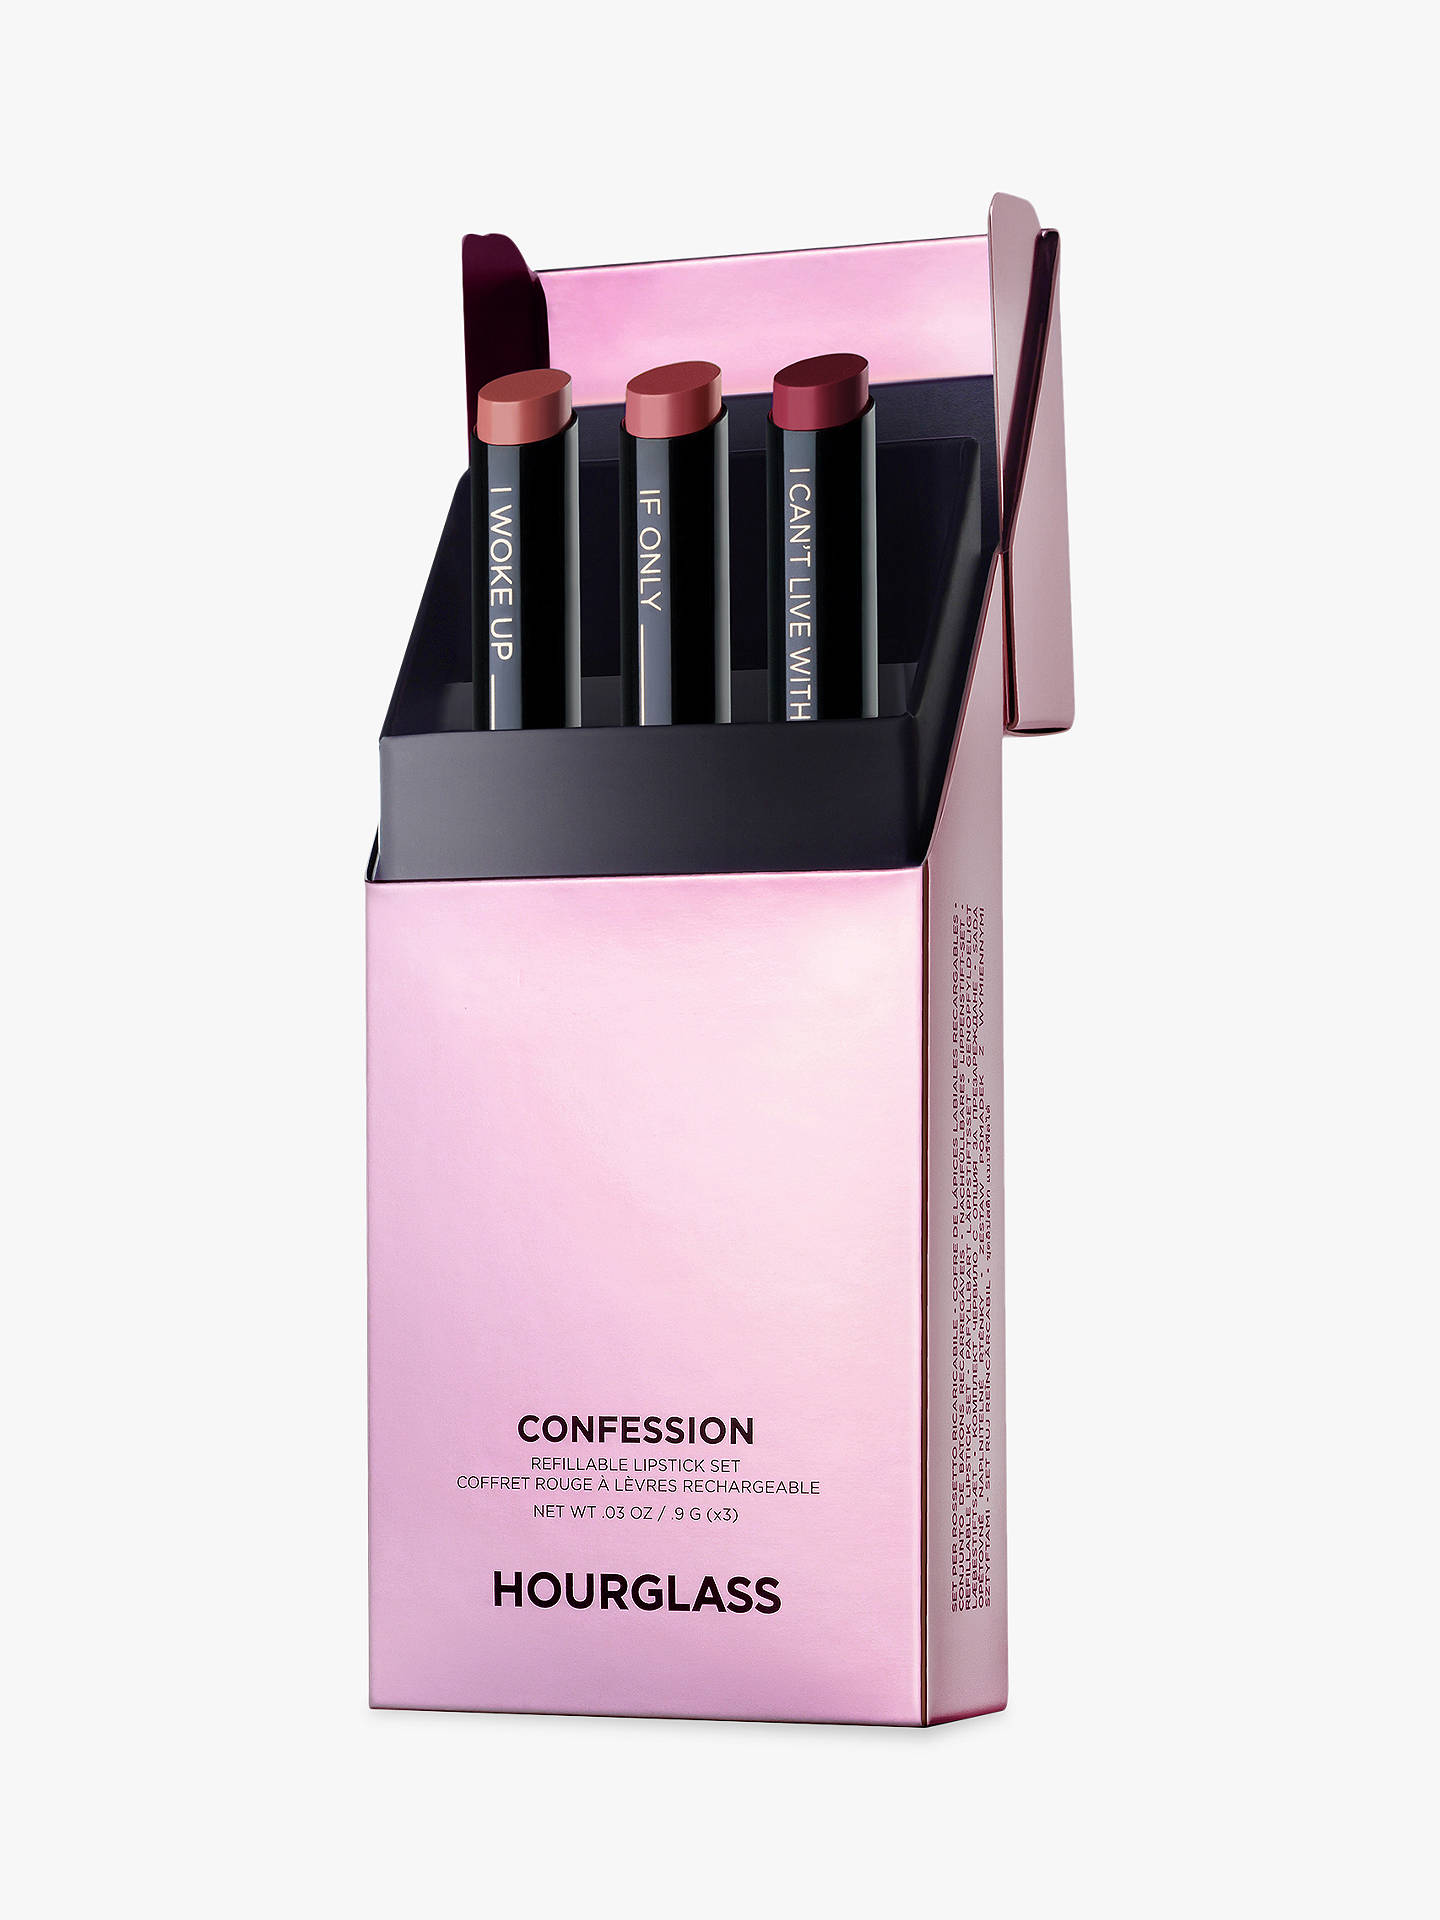 Hourglass Confession Refillable Lipstick Gift Set at John